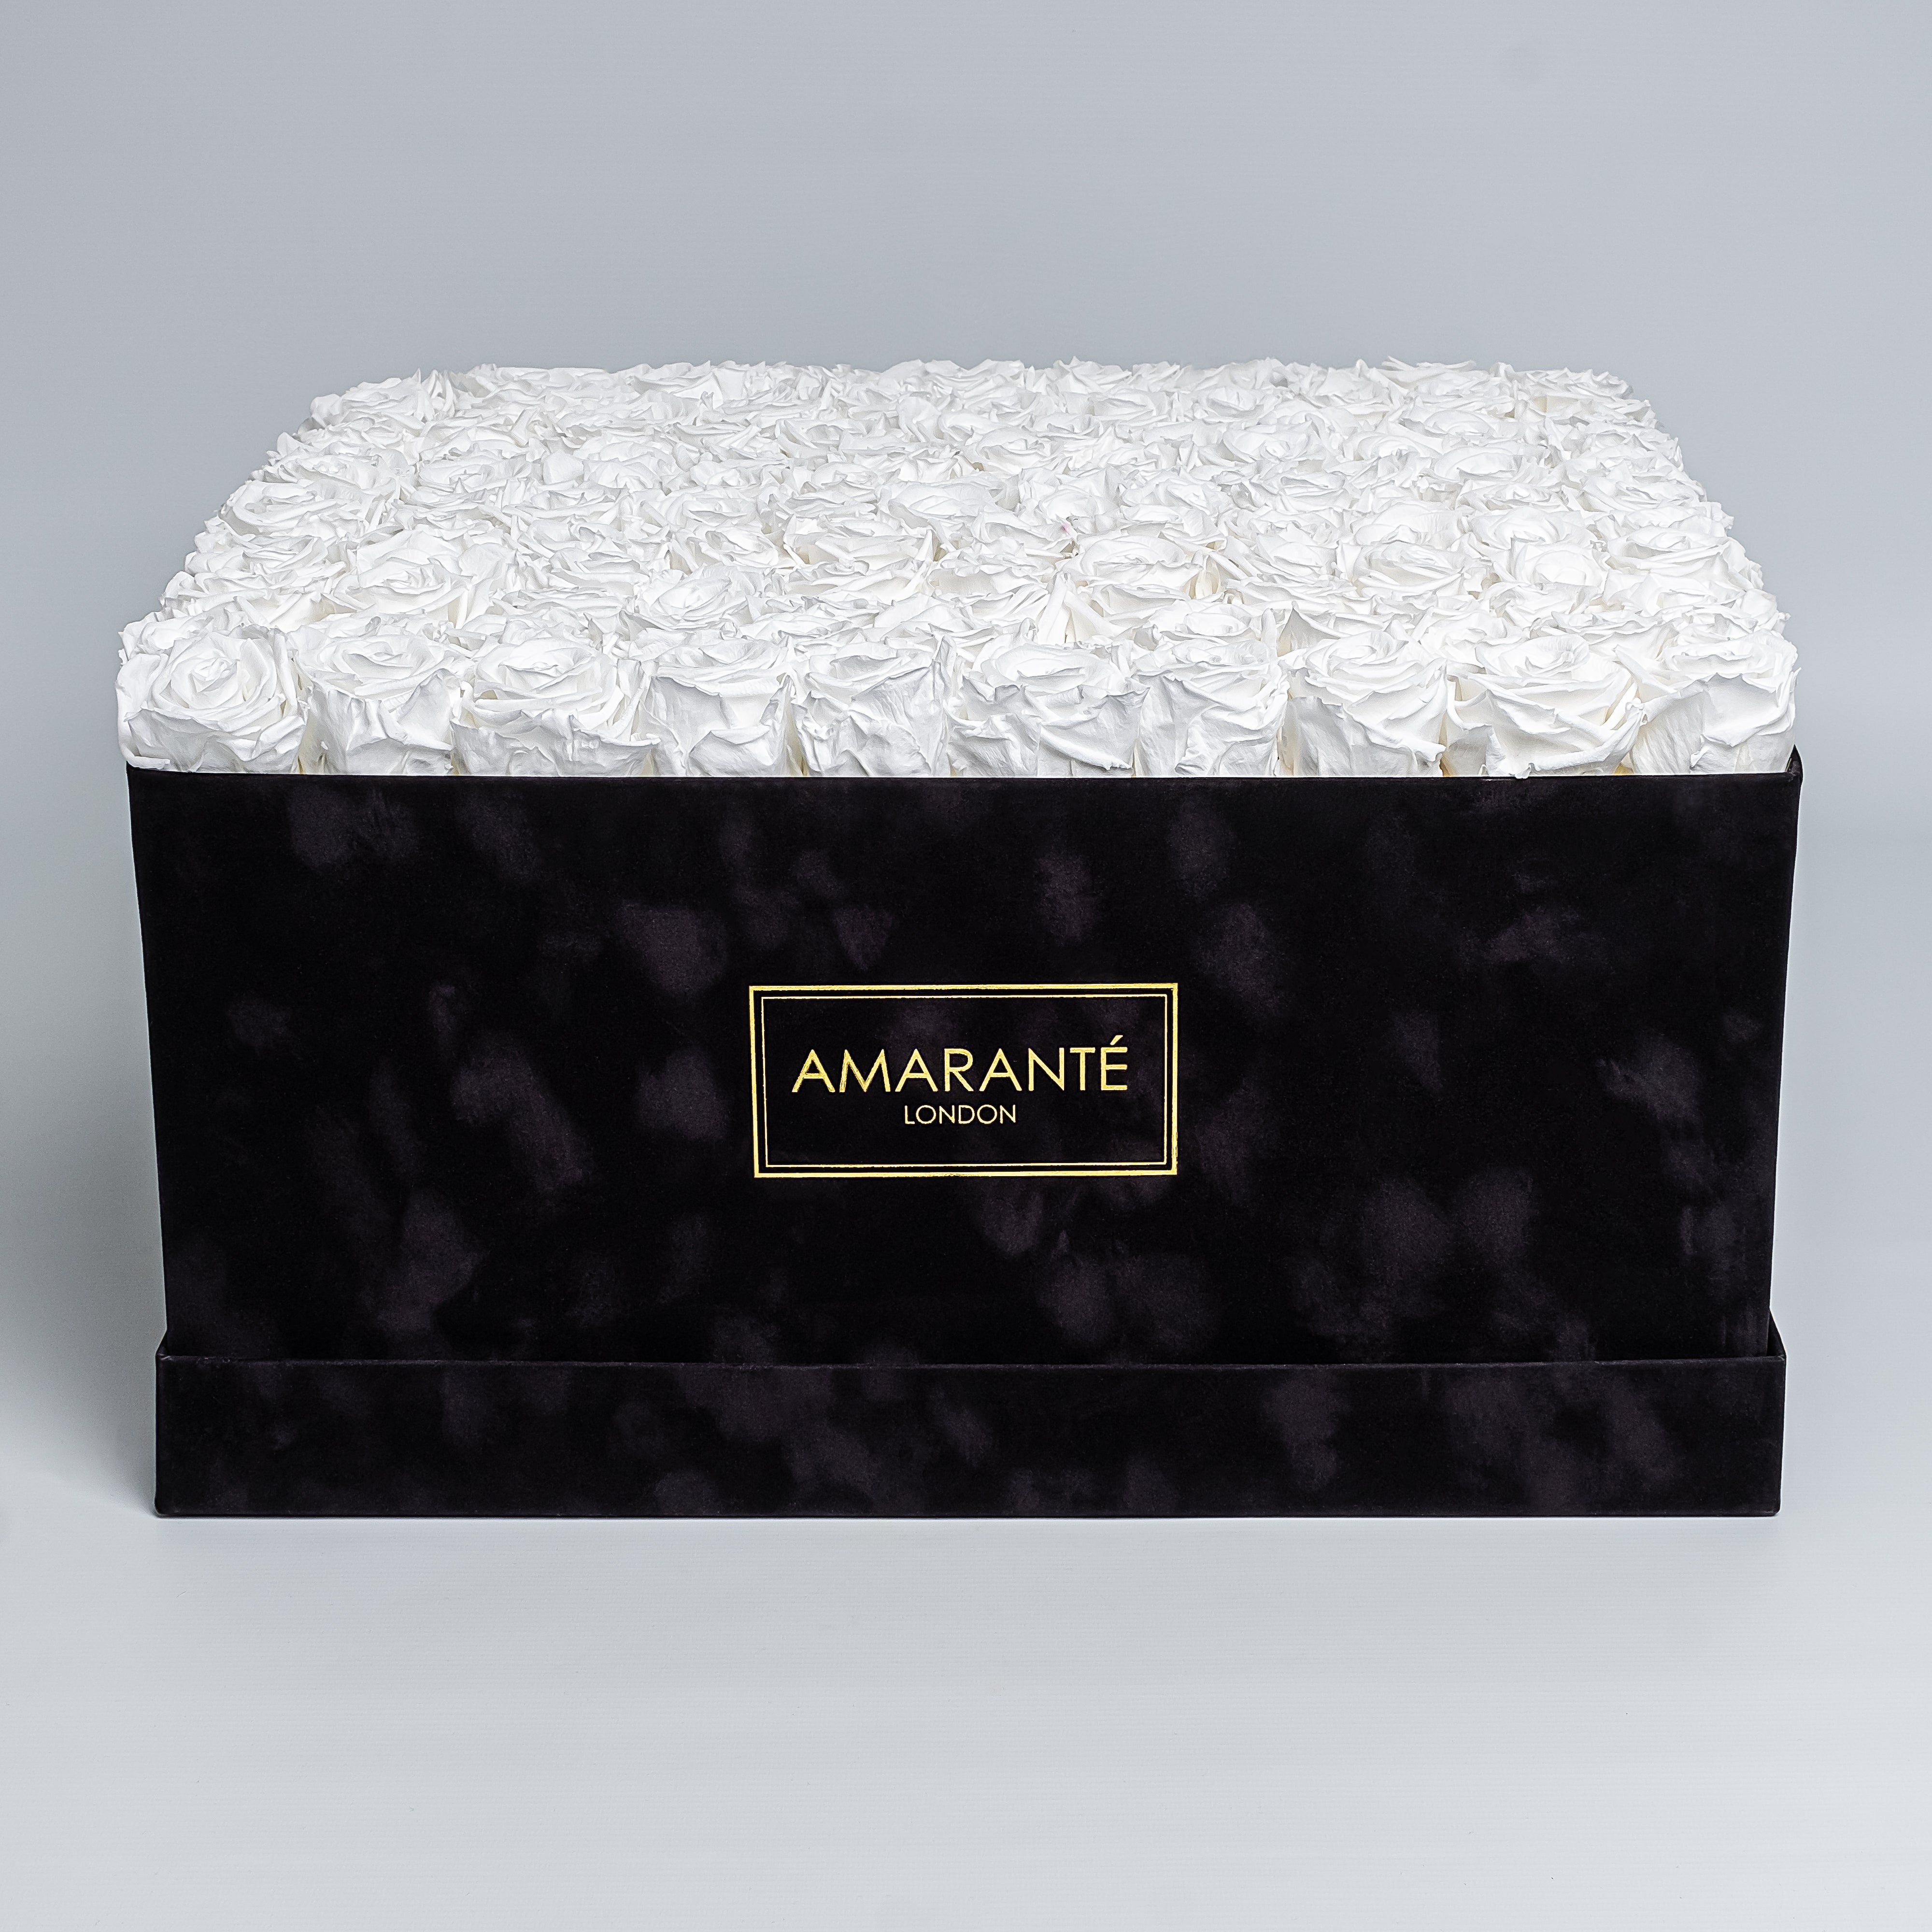 Super deluxe black square suede rose box, 20"x20", with 150 large white infinity roses.